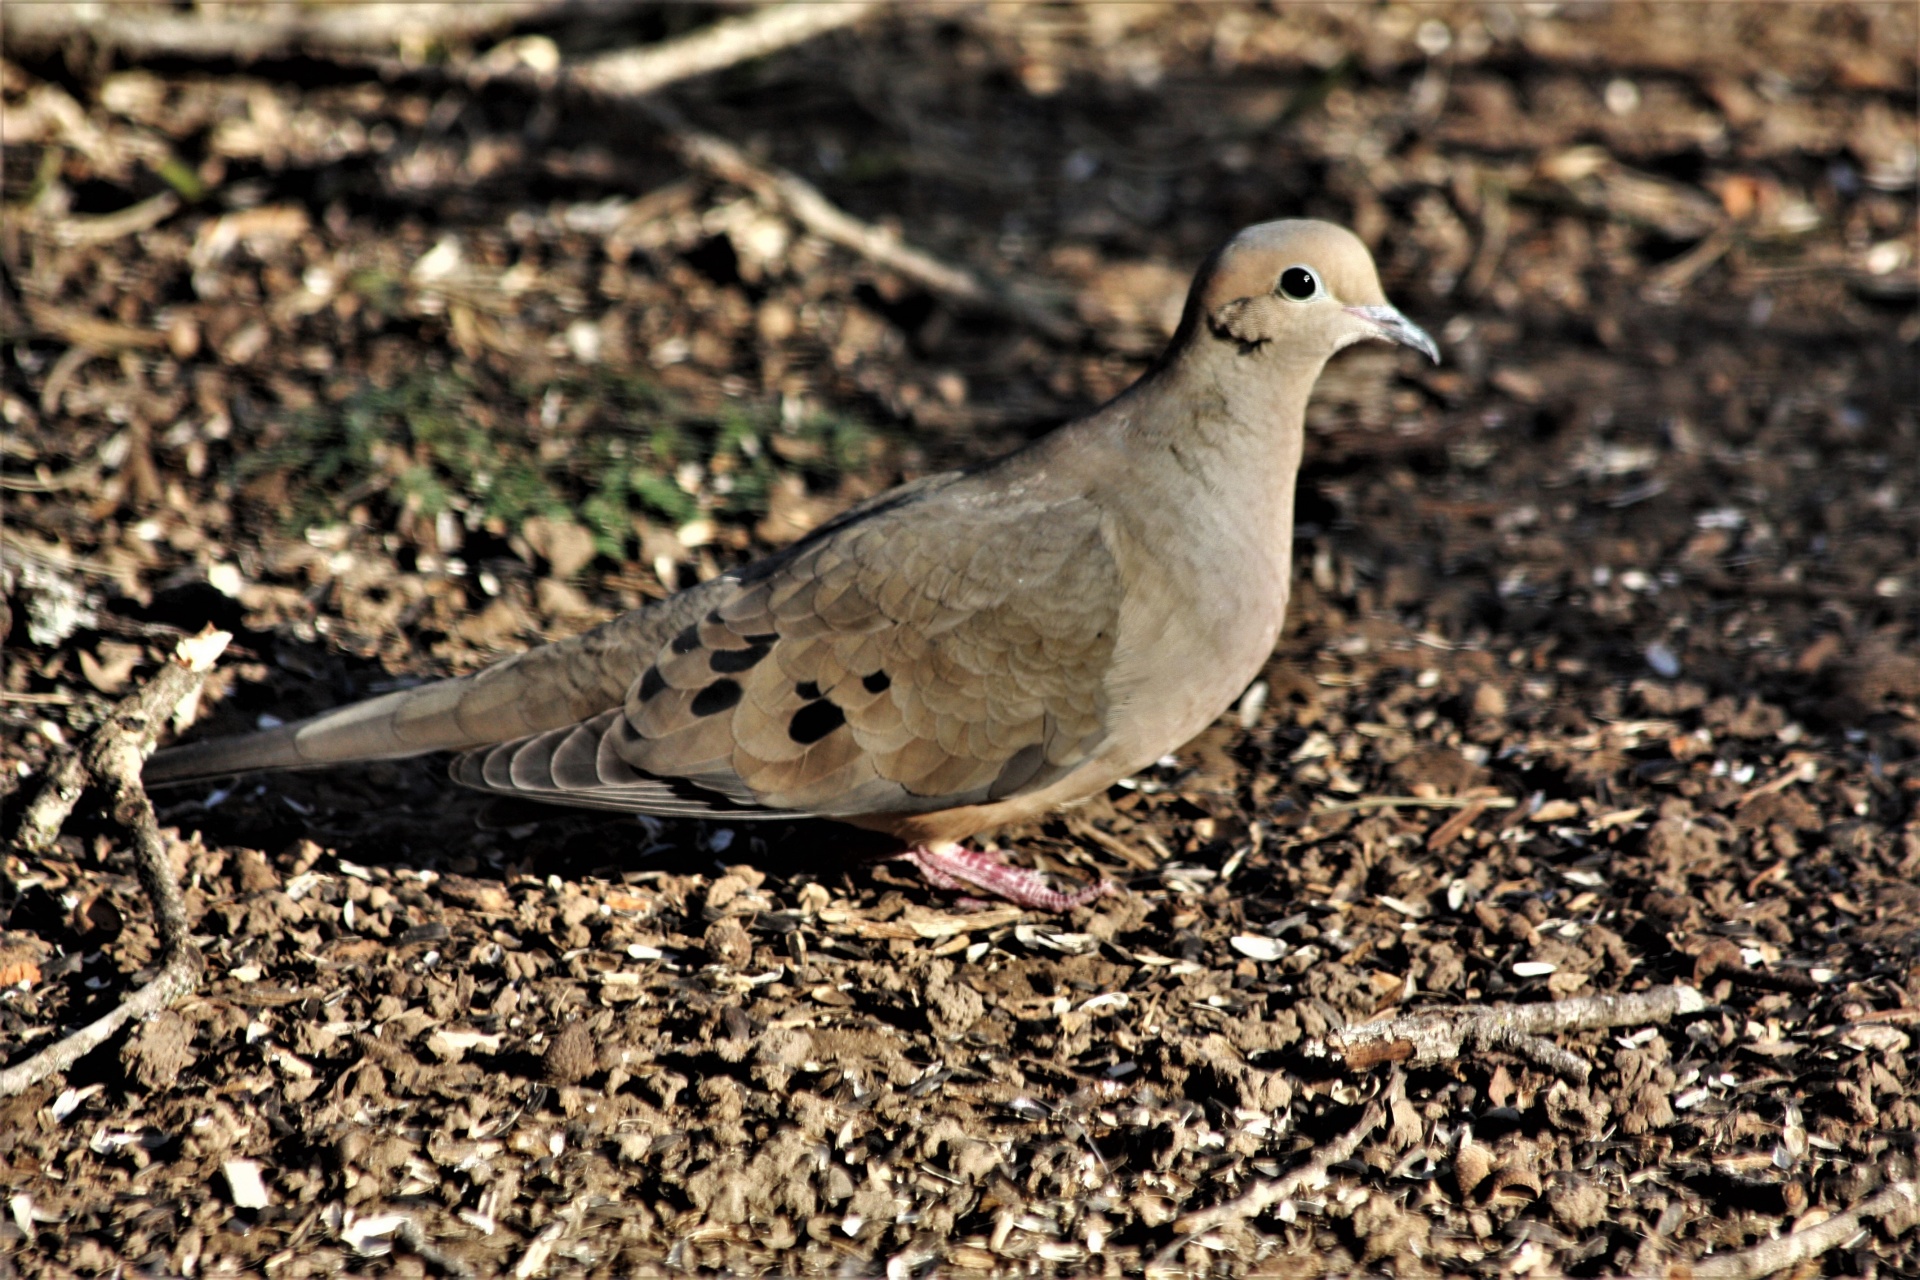 Close-up of a beautiful gray mourning dove as it sits on the ground among sunflower seeds.